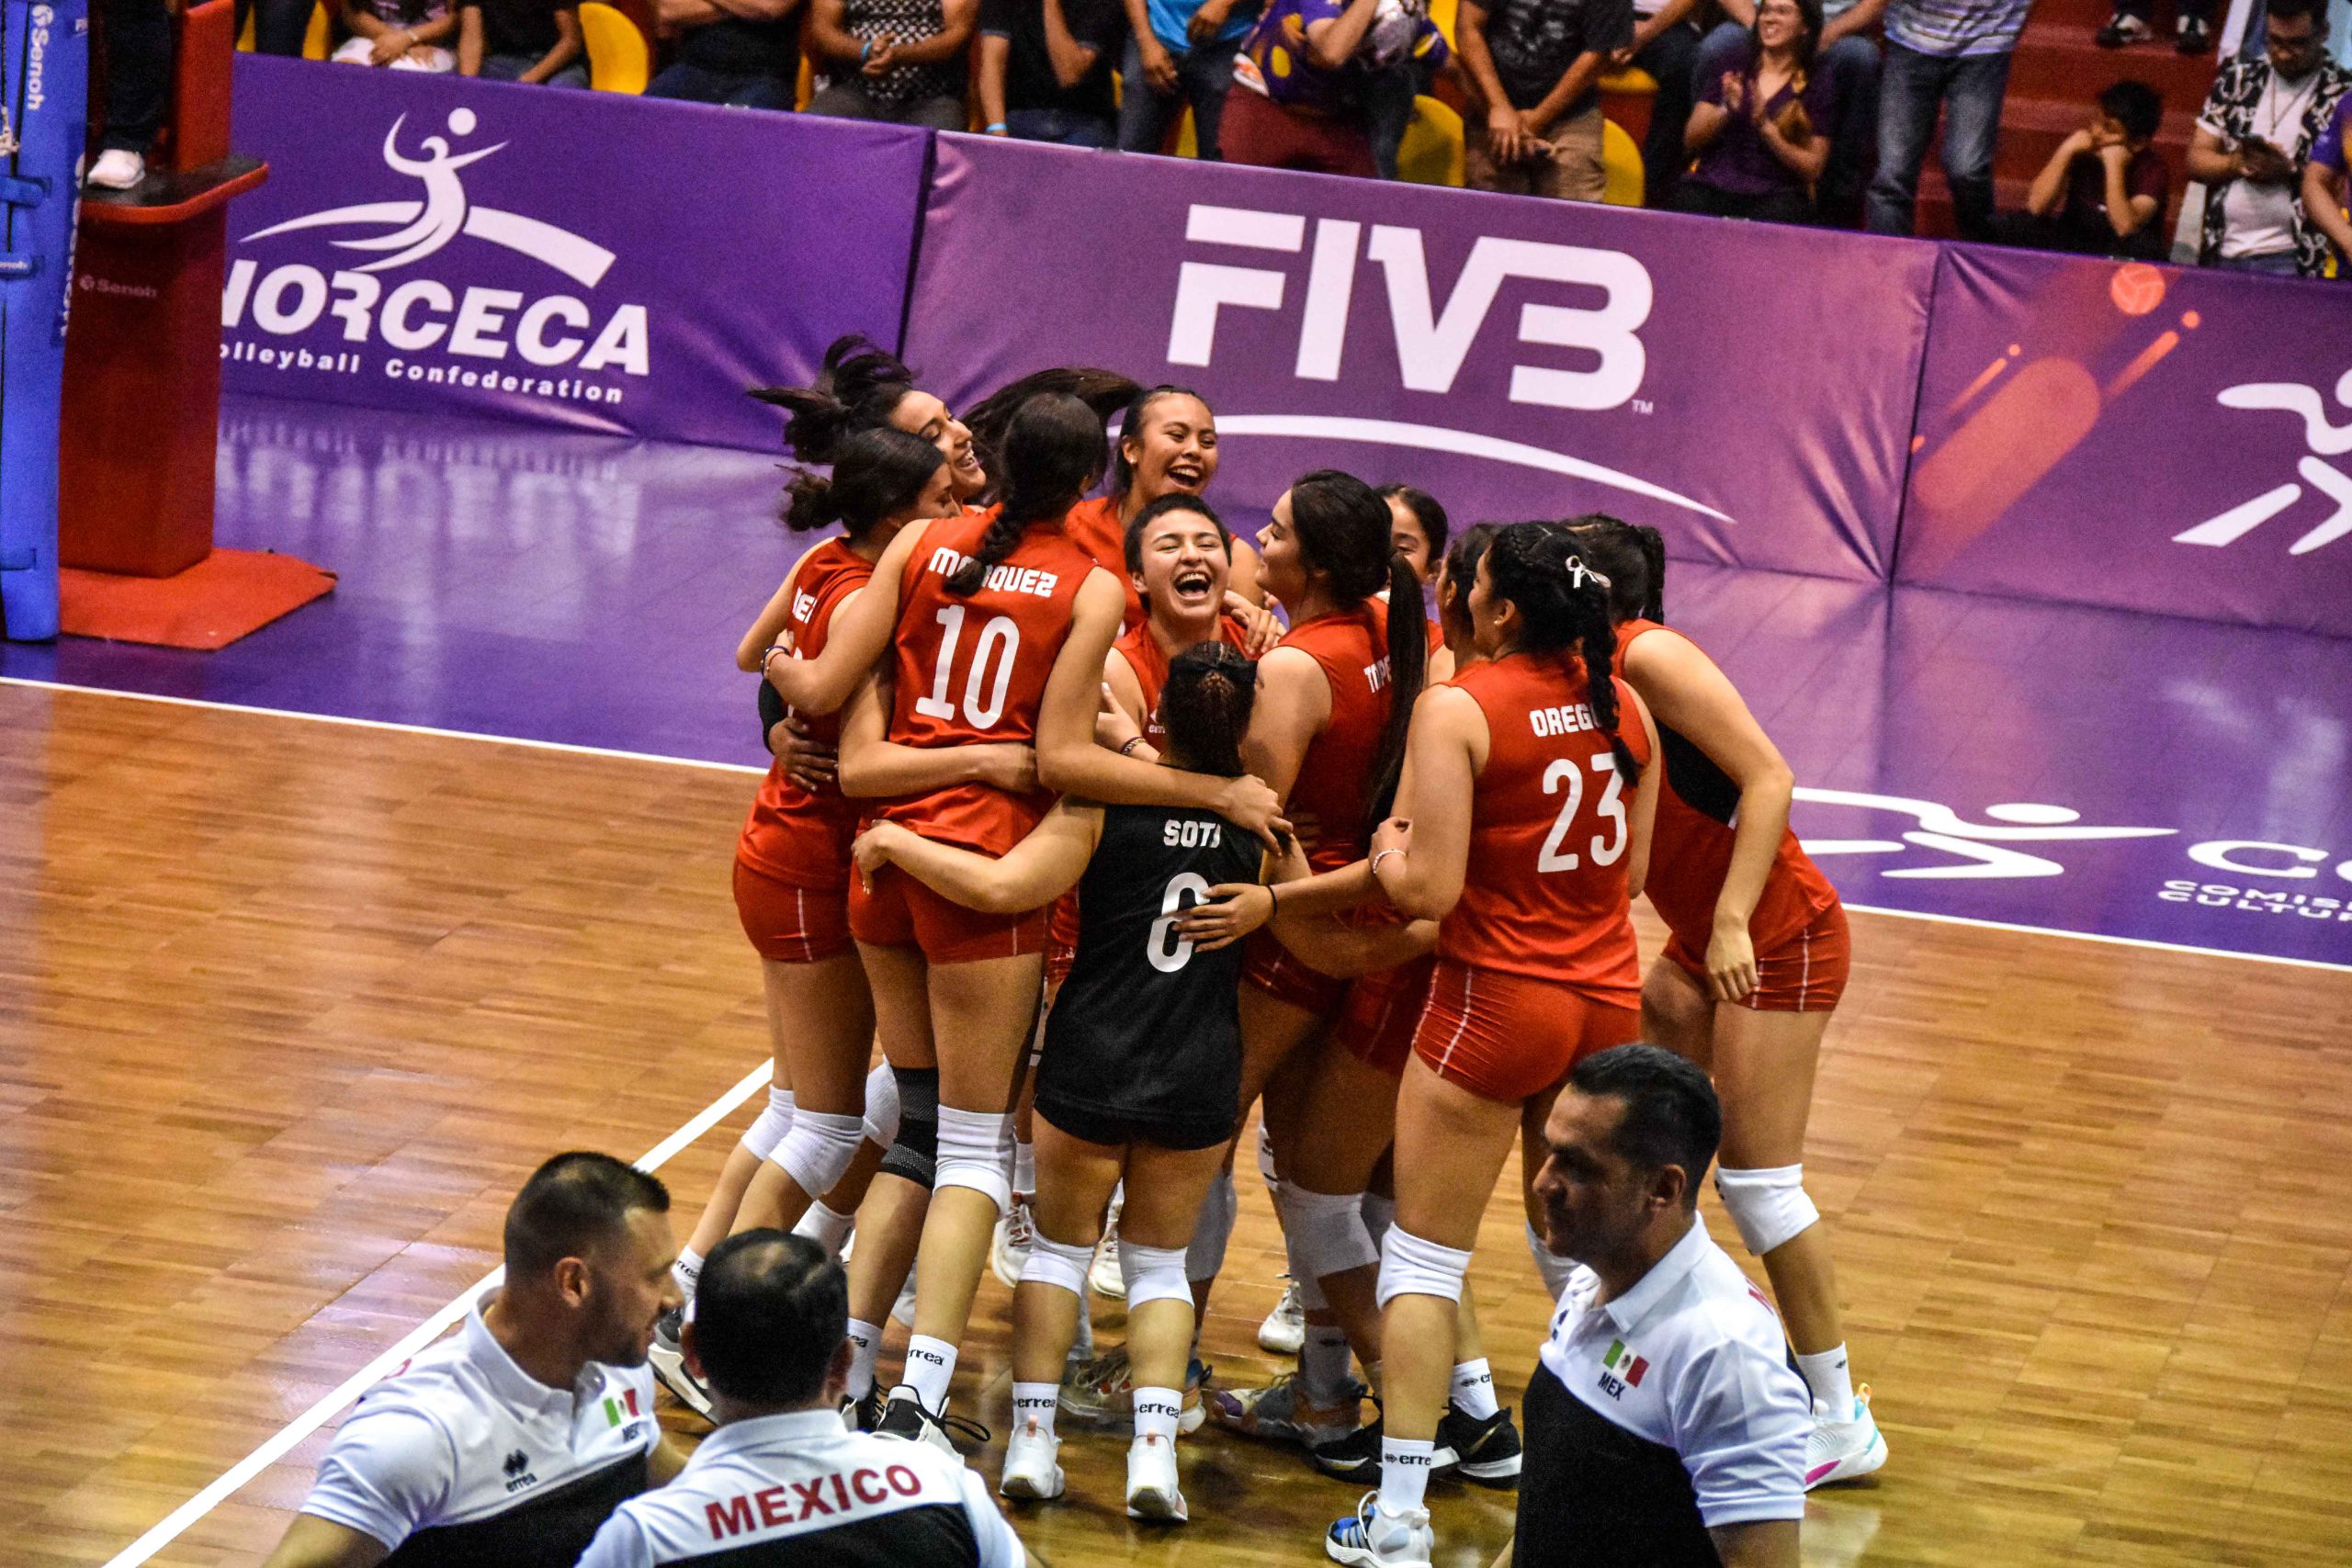 Mexico remains undefeated taking down Cuba in four sets